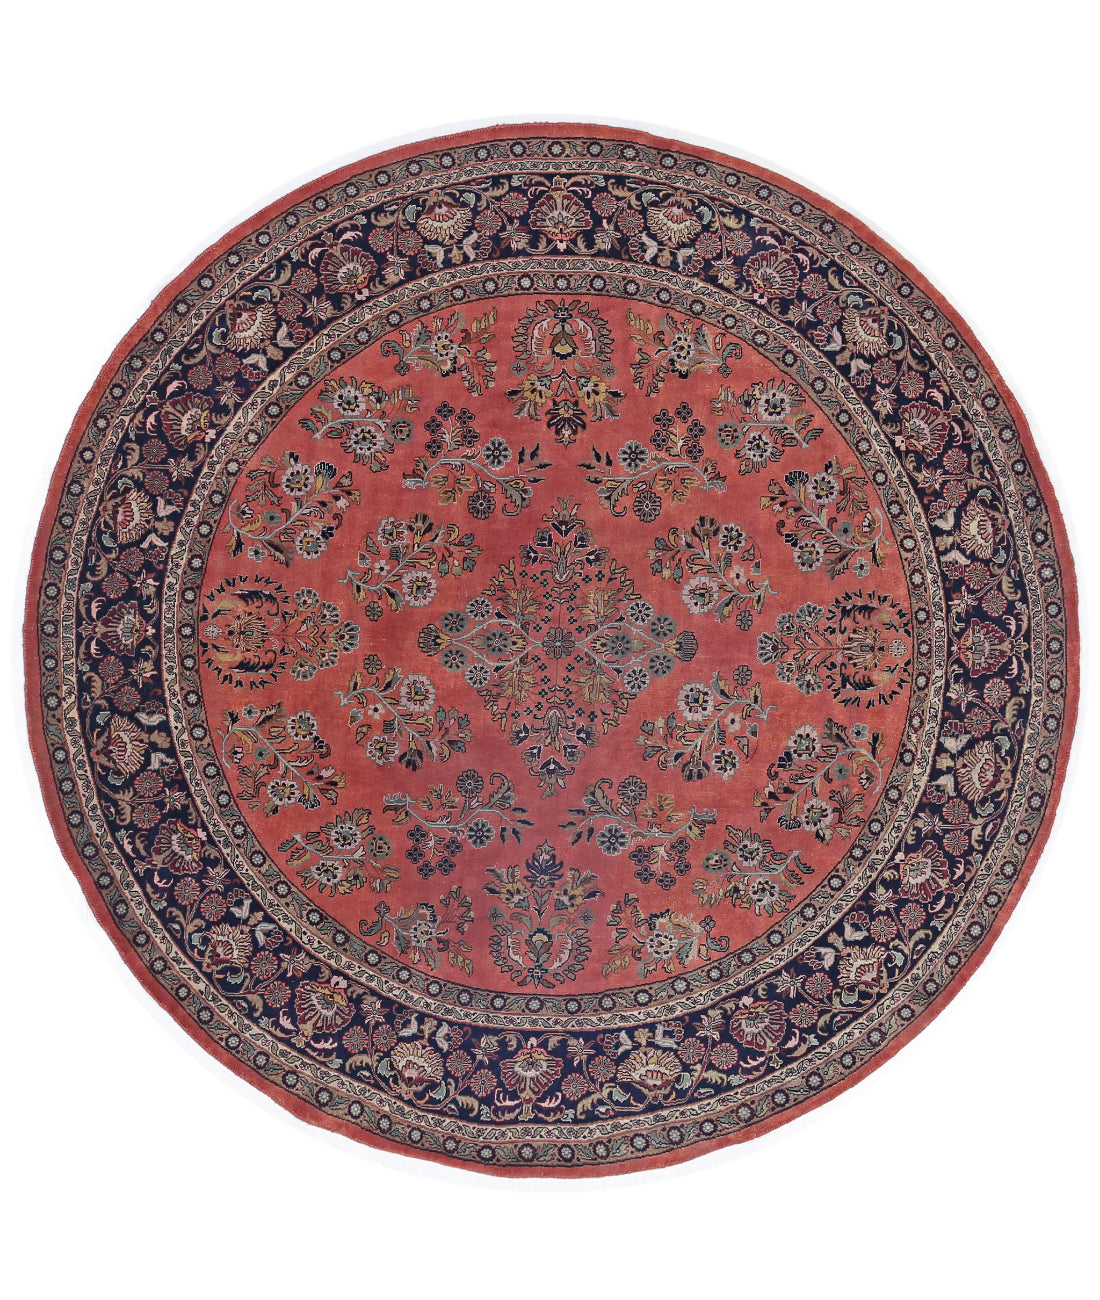 Hand Knotted Heritage Persian Style Wool Rug - 7'8'' x 7'10'' 7'8'' x 7'10'' (230 X 235) / Pink / Blue